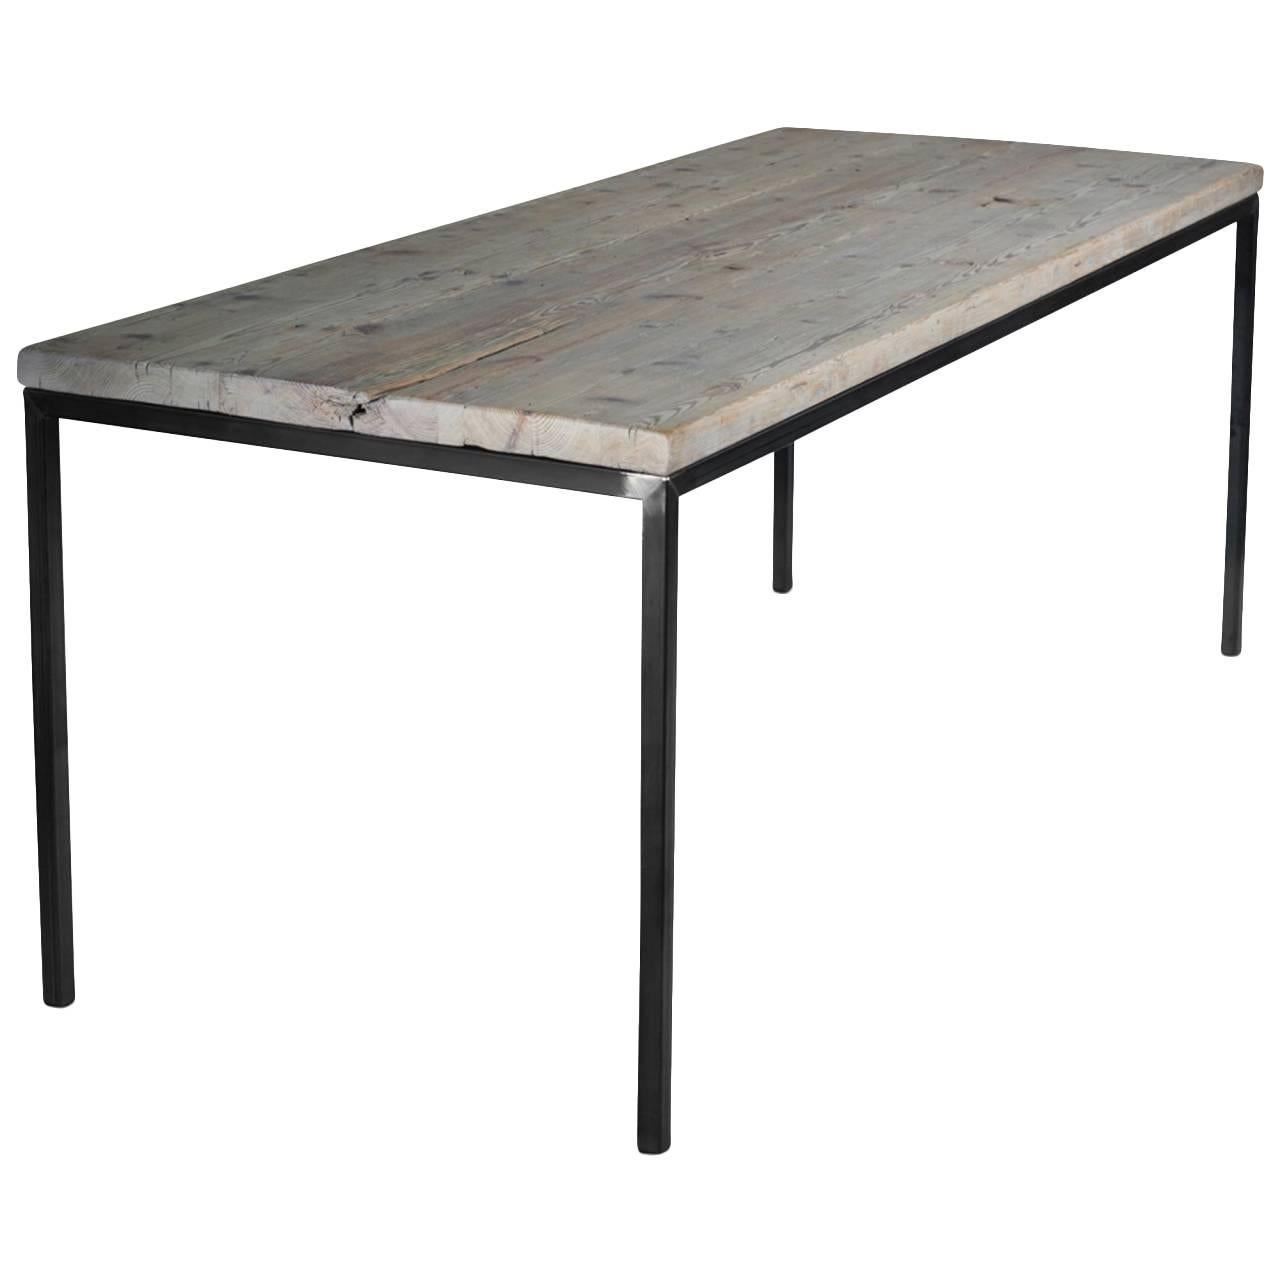 Dining Room Table "NO 01" by Manufacturer WUUD in Spruce Wood and Steel (250 cm) For Sale